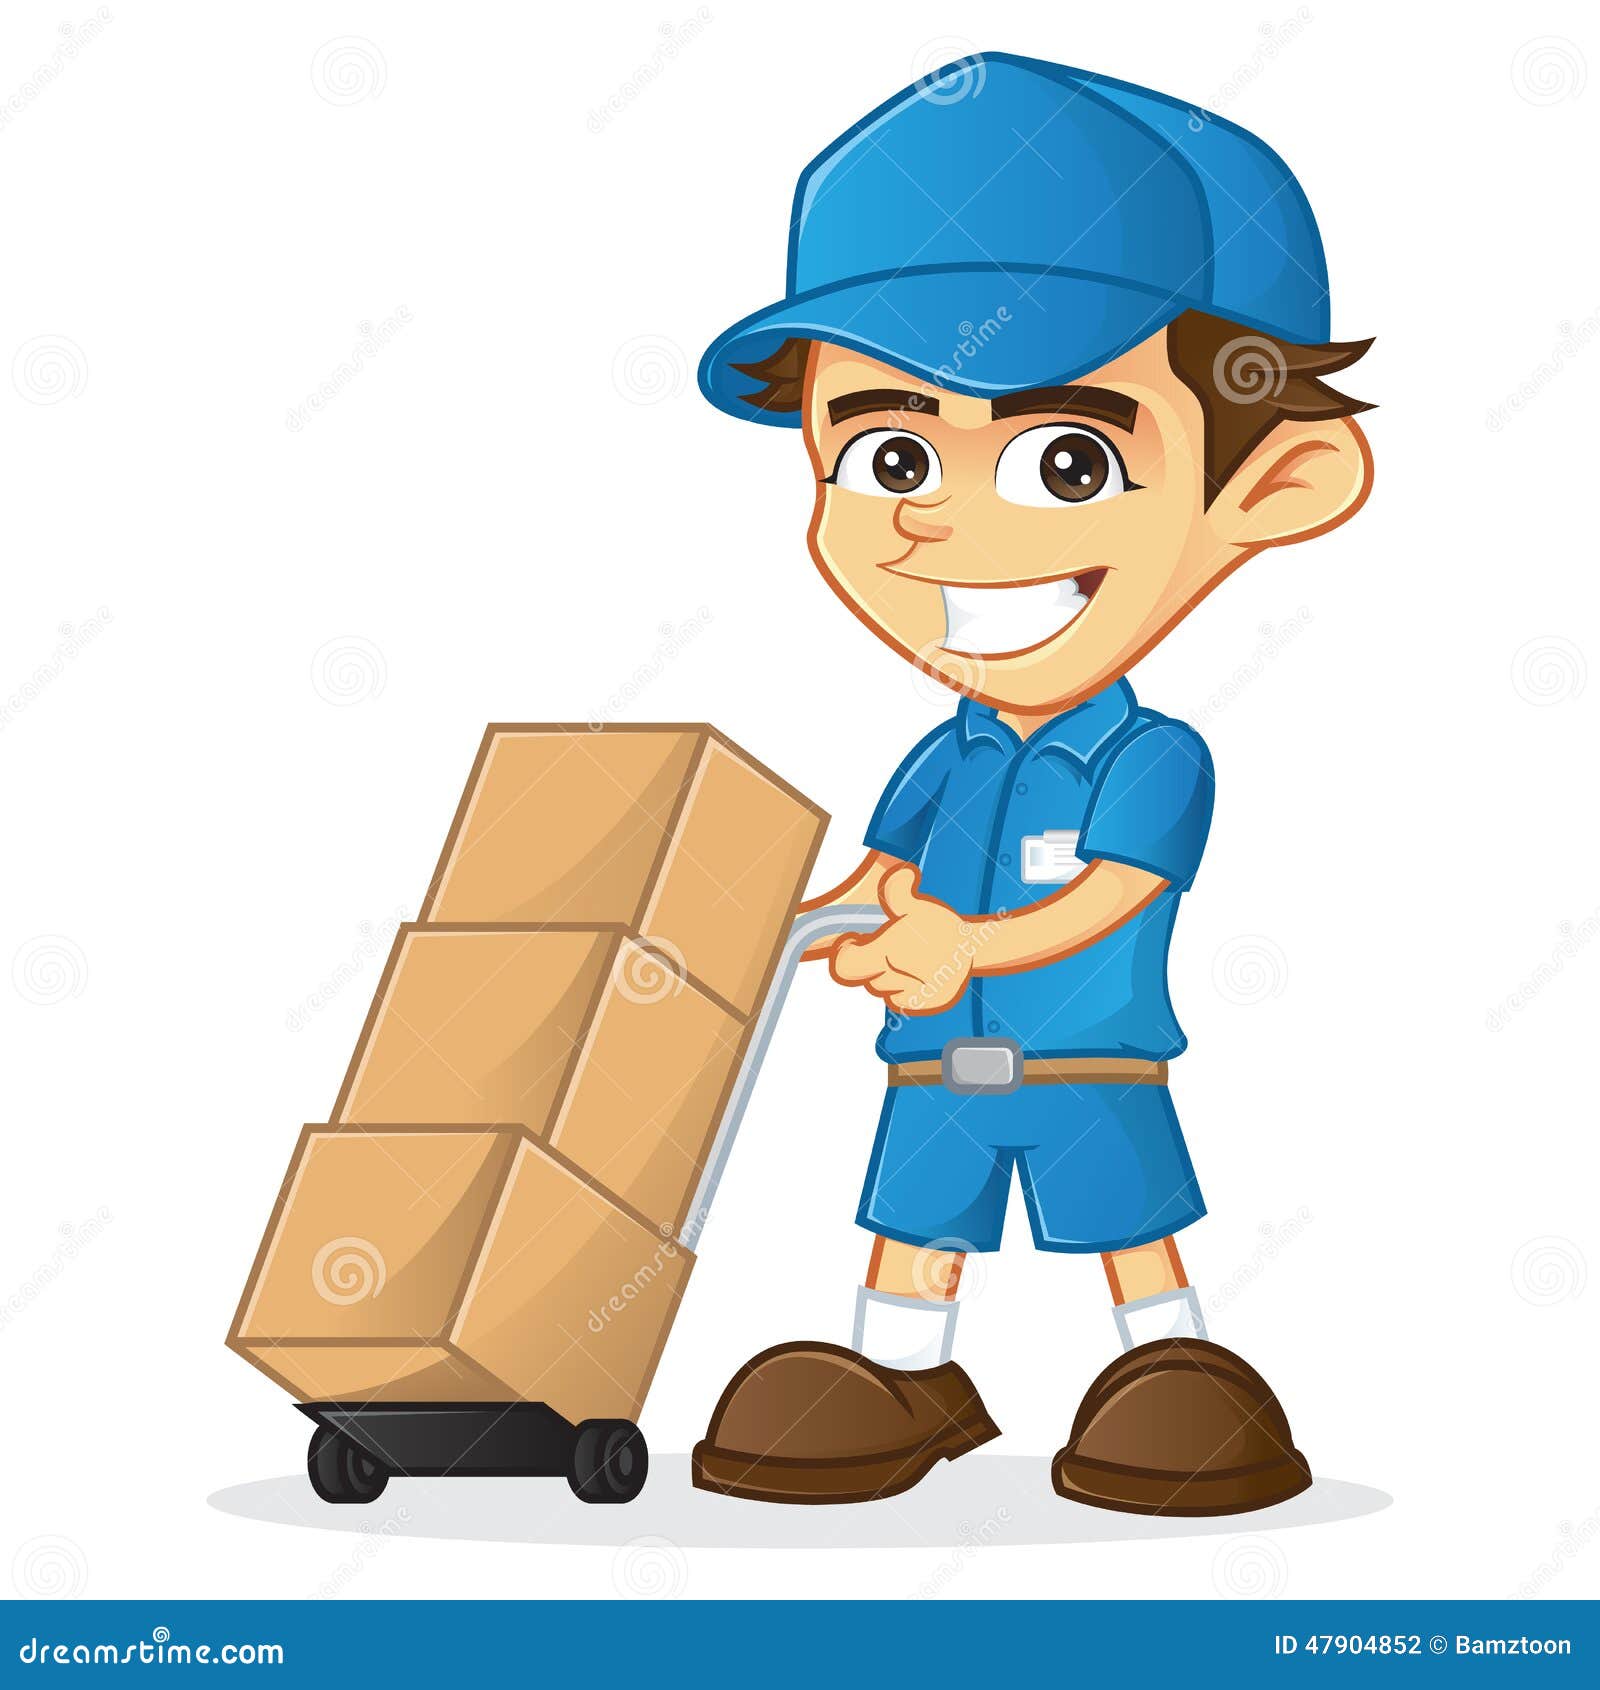 clipart delivery - photo #47